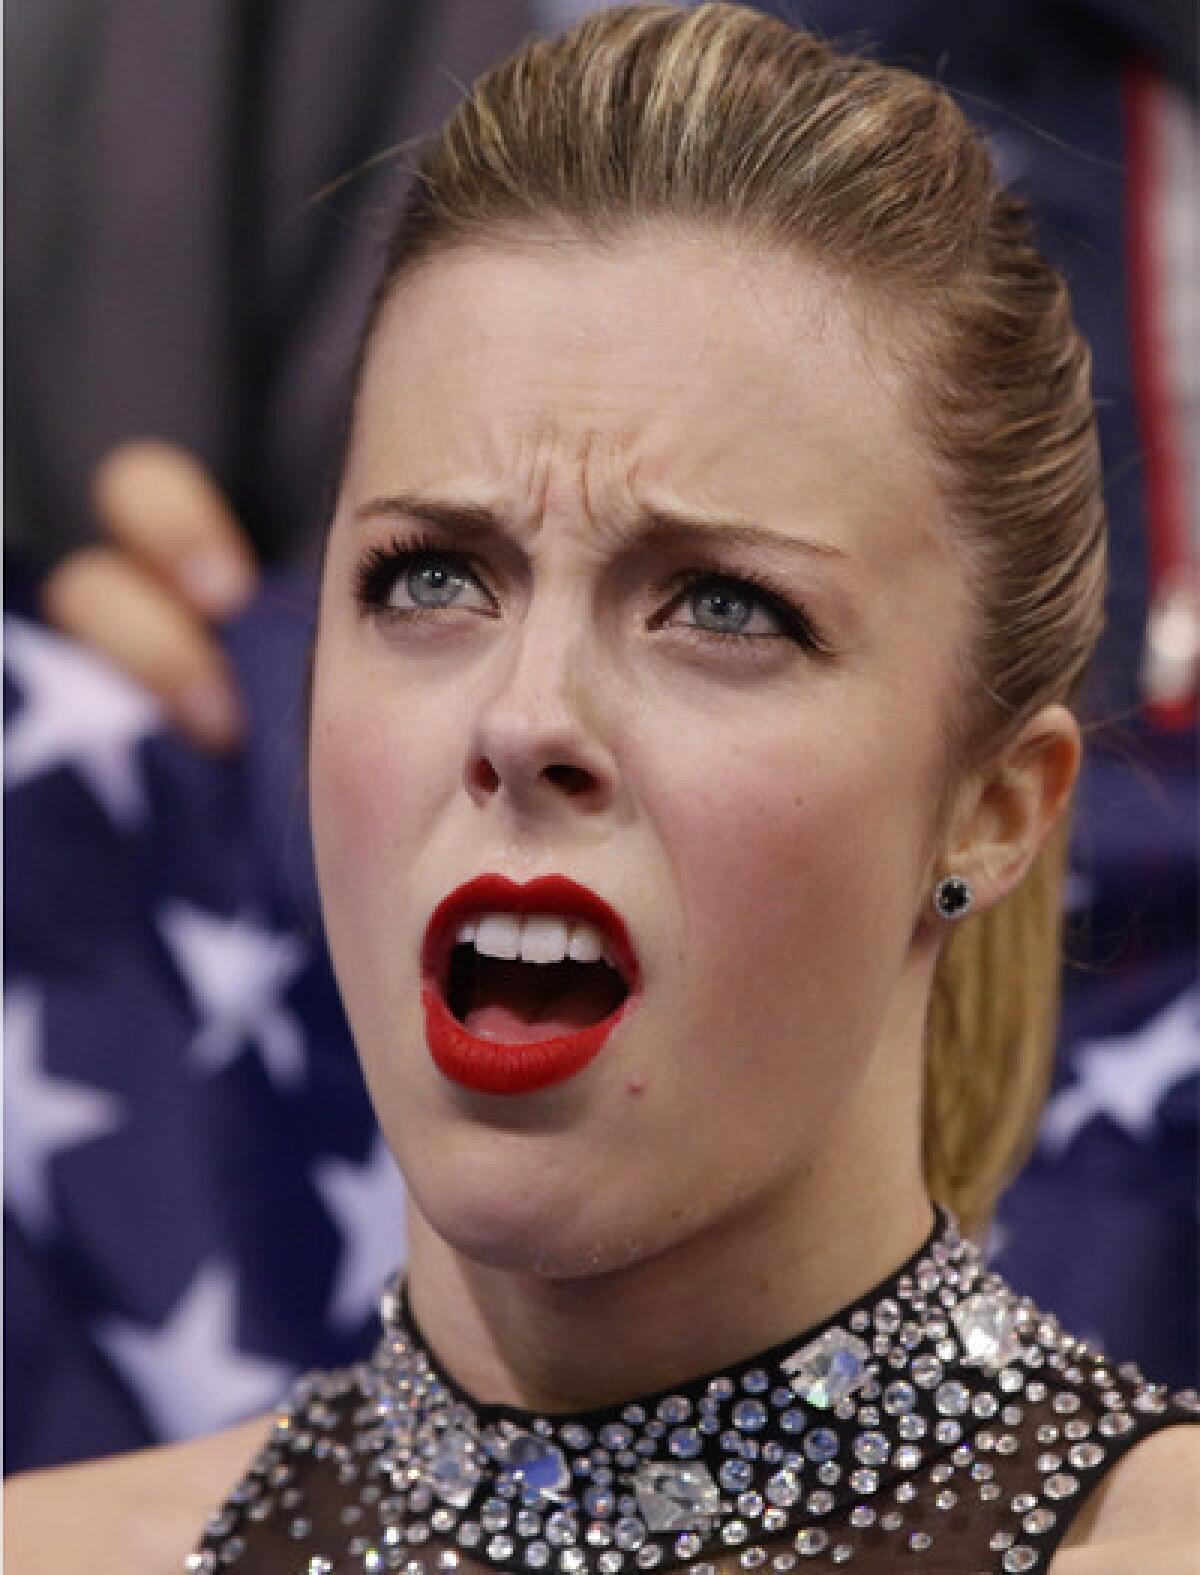 U.S. skater Ashley Wagner couldn't hide her disappointment when her score was revealed Saturday during the team event in Sochi.